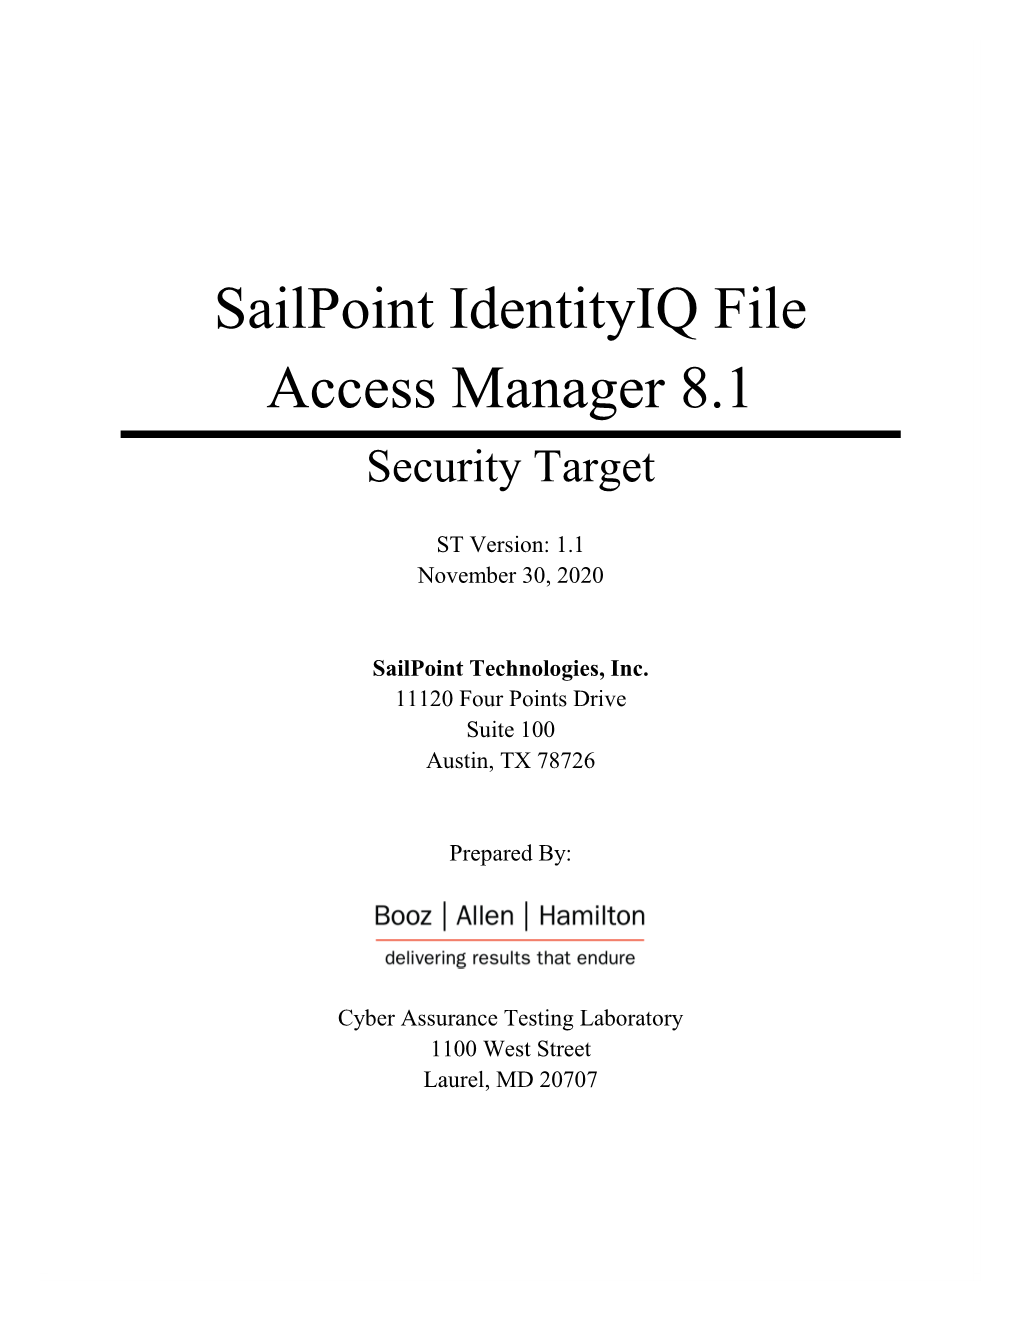 Sailpoint Identityiq File Access Manager 8.1 Security Target